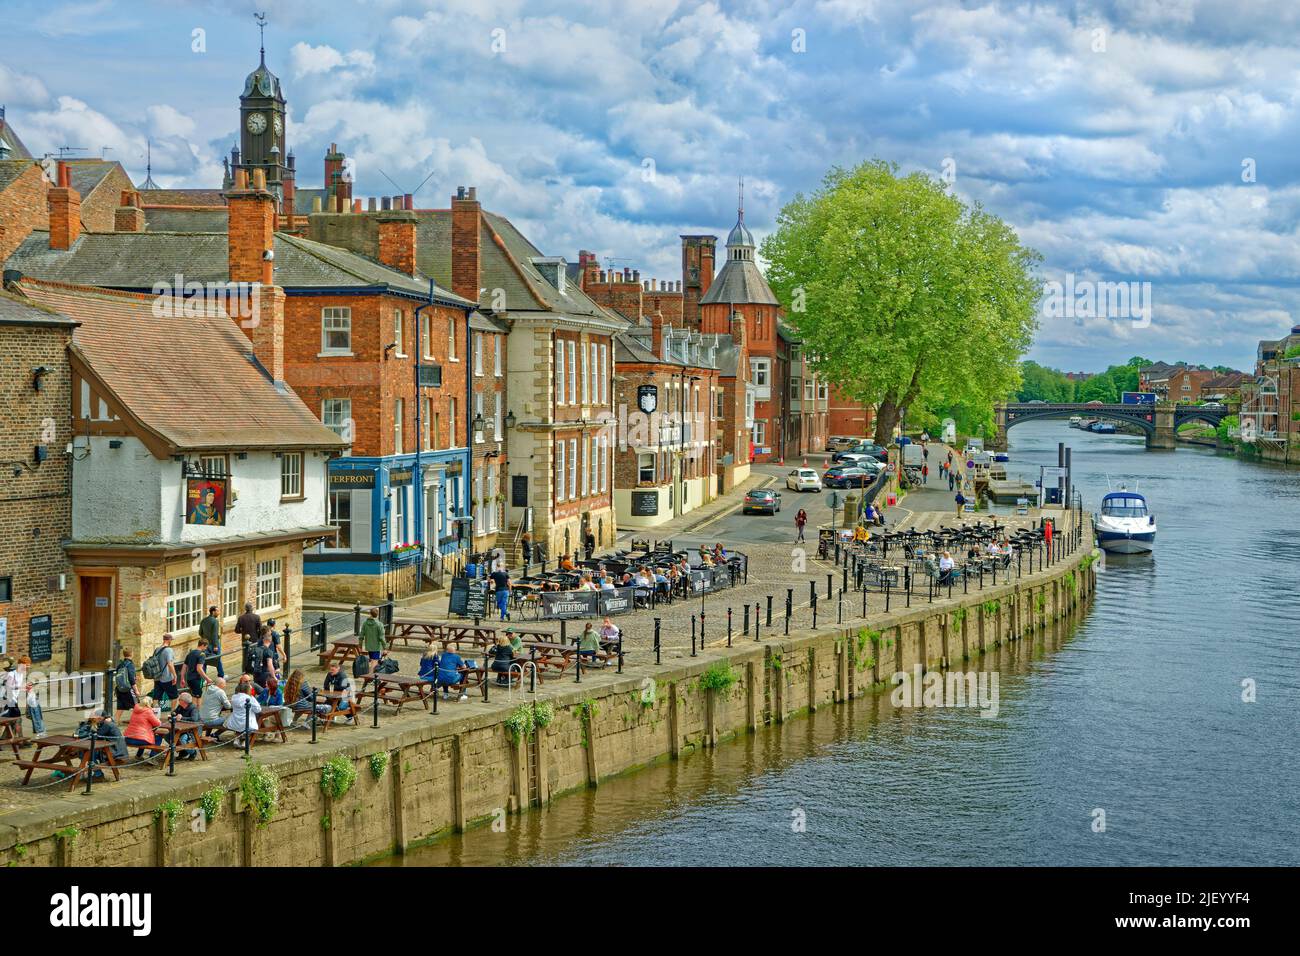 Il fiume Ouse a York, Yorkshire, Inghilterra. Foto Stock